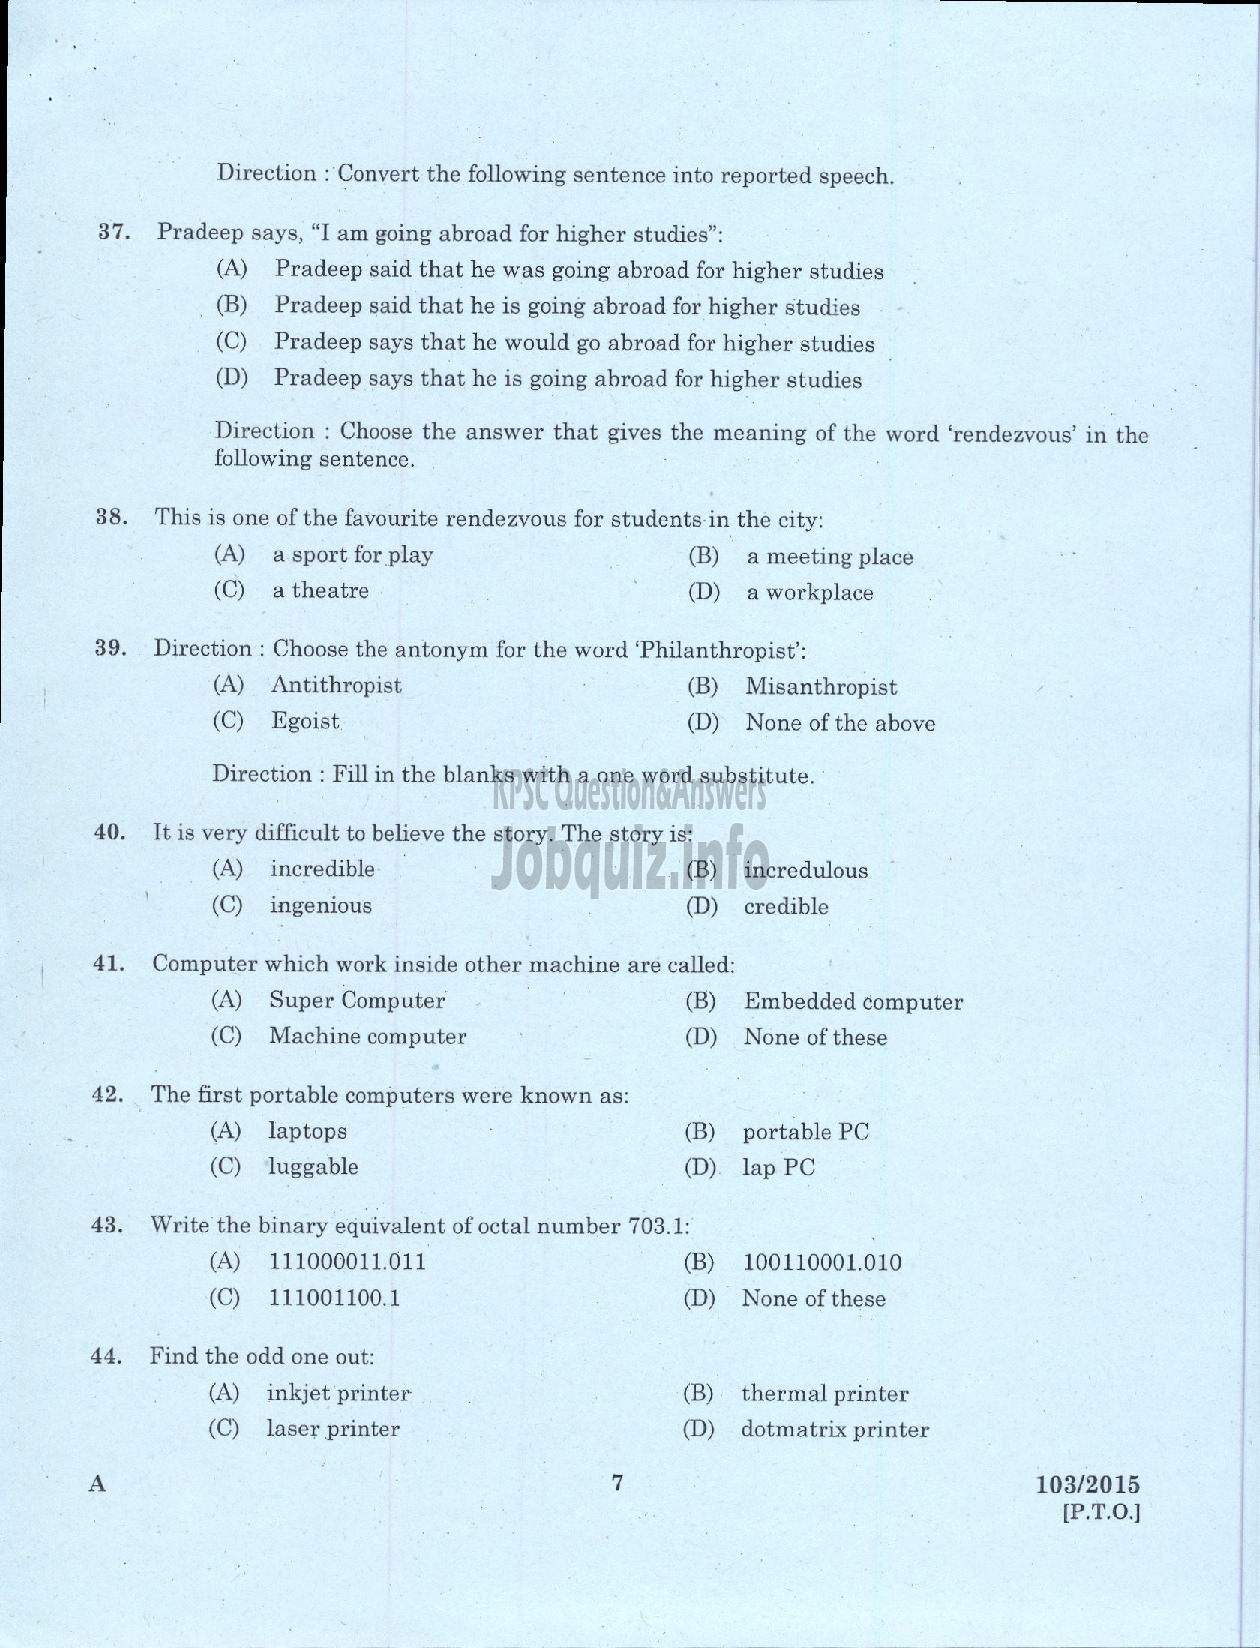 Kerala PSC Question Paper - ADMINISTRATIVE OFFICER BY TRANSFER INTERNAL KSRTC-5